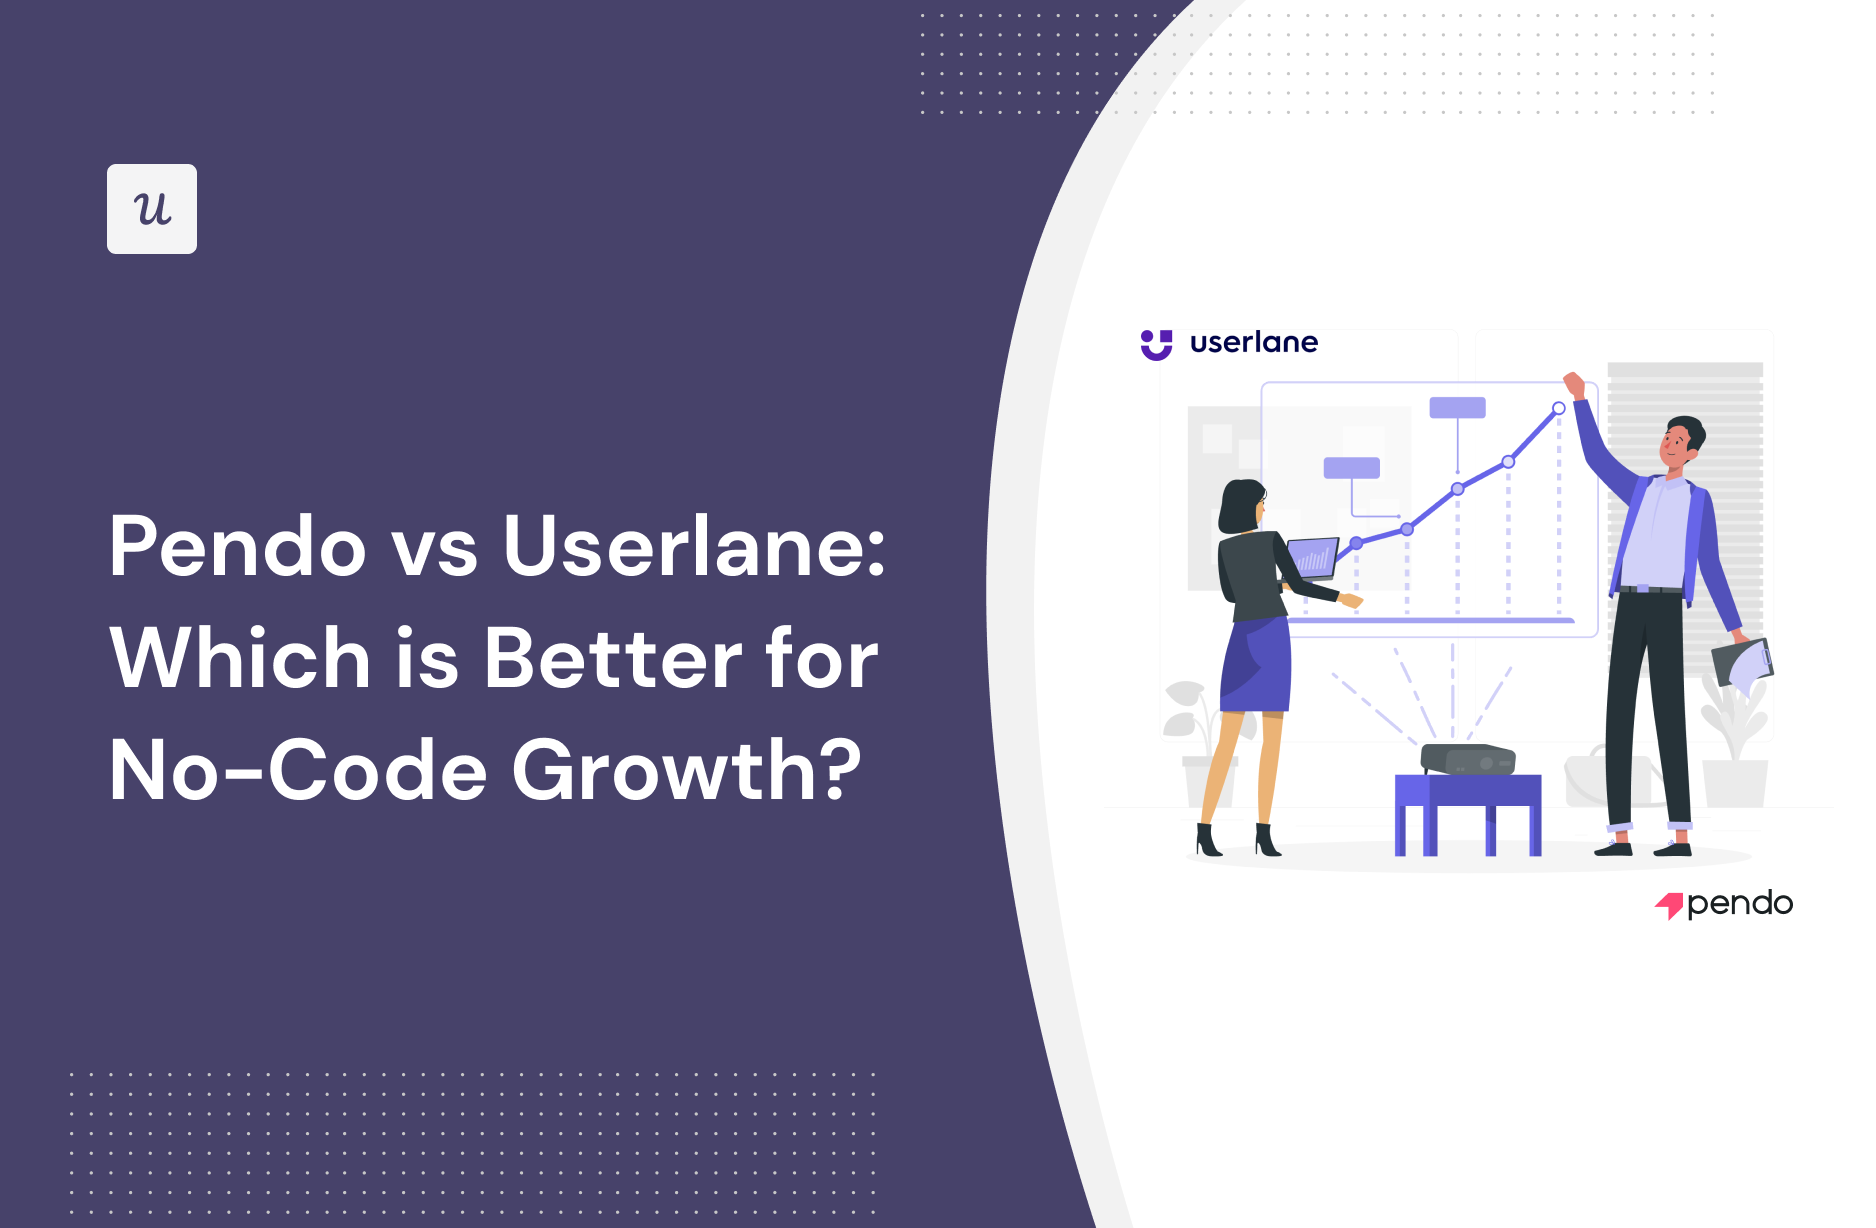 Pendo vs Userlane: Which is Better for No-Code Growth?